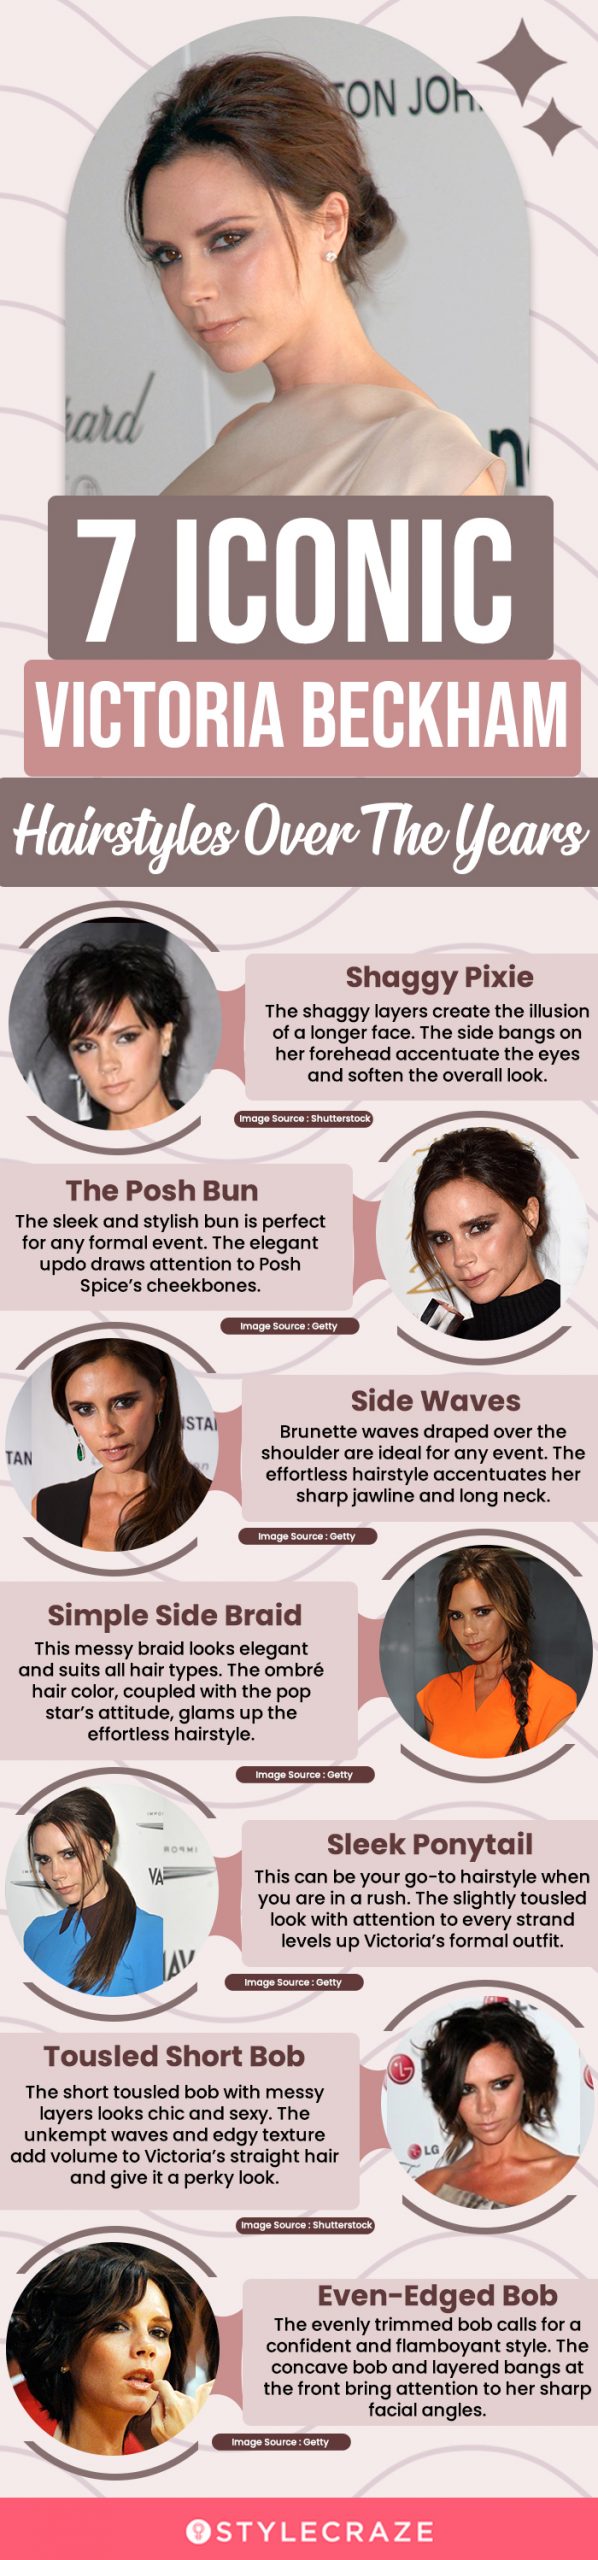 7 iconic victoria beckham hairstyles over the years (infographic)